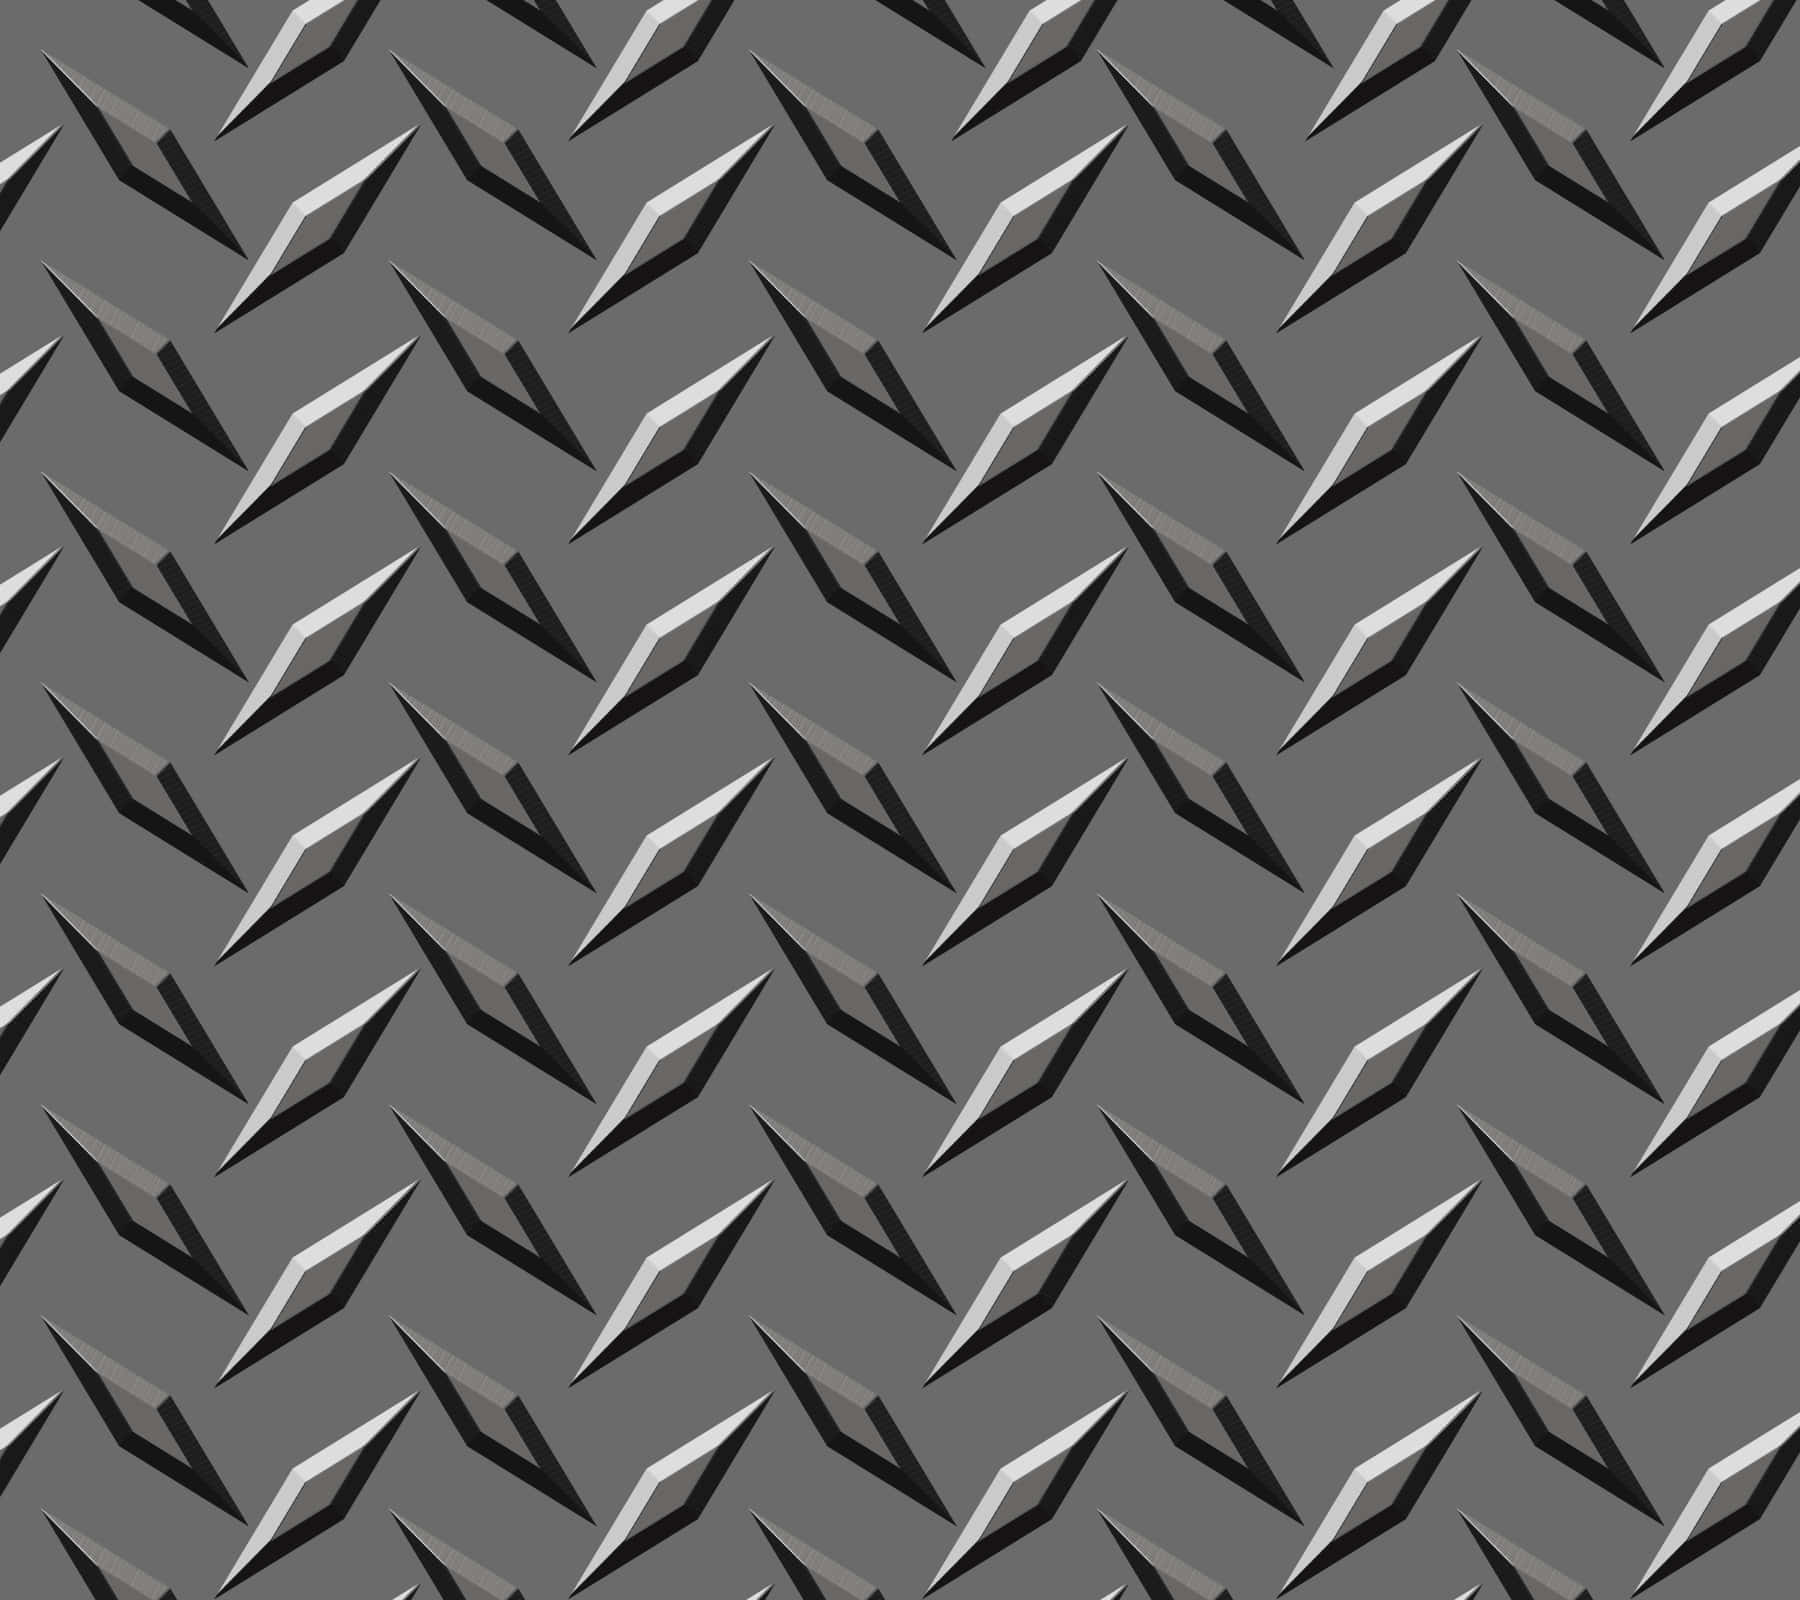 Go for the shine with this glossy diamond plate pattern in high resolution. Wallpaper